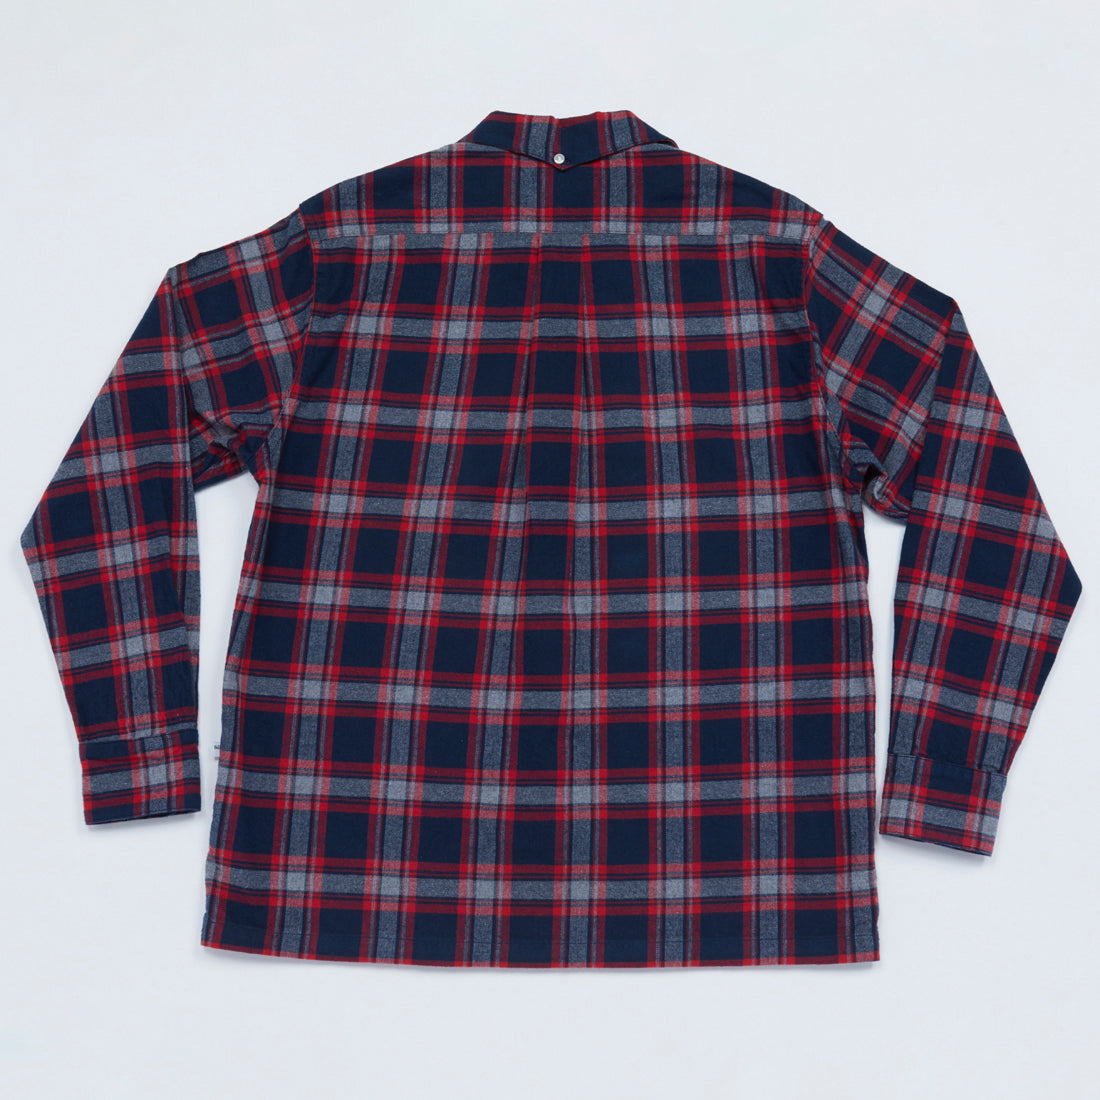 Convertible Collar Button-down in Plaid Flannel (Navy x Red)